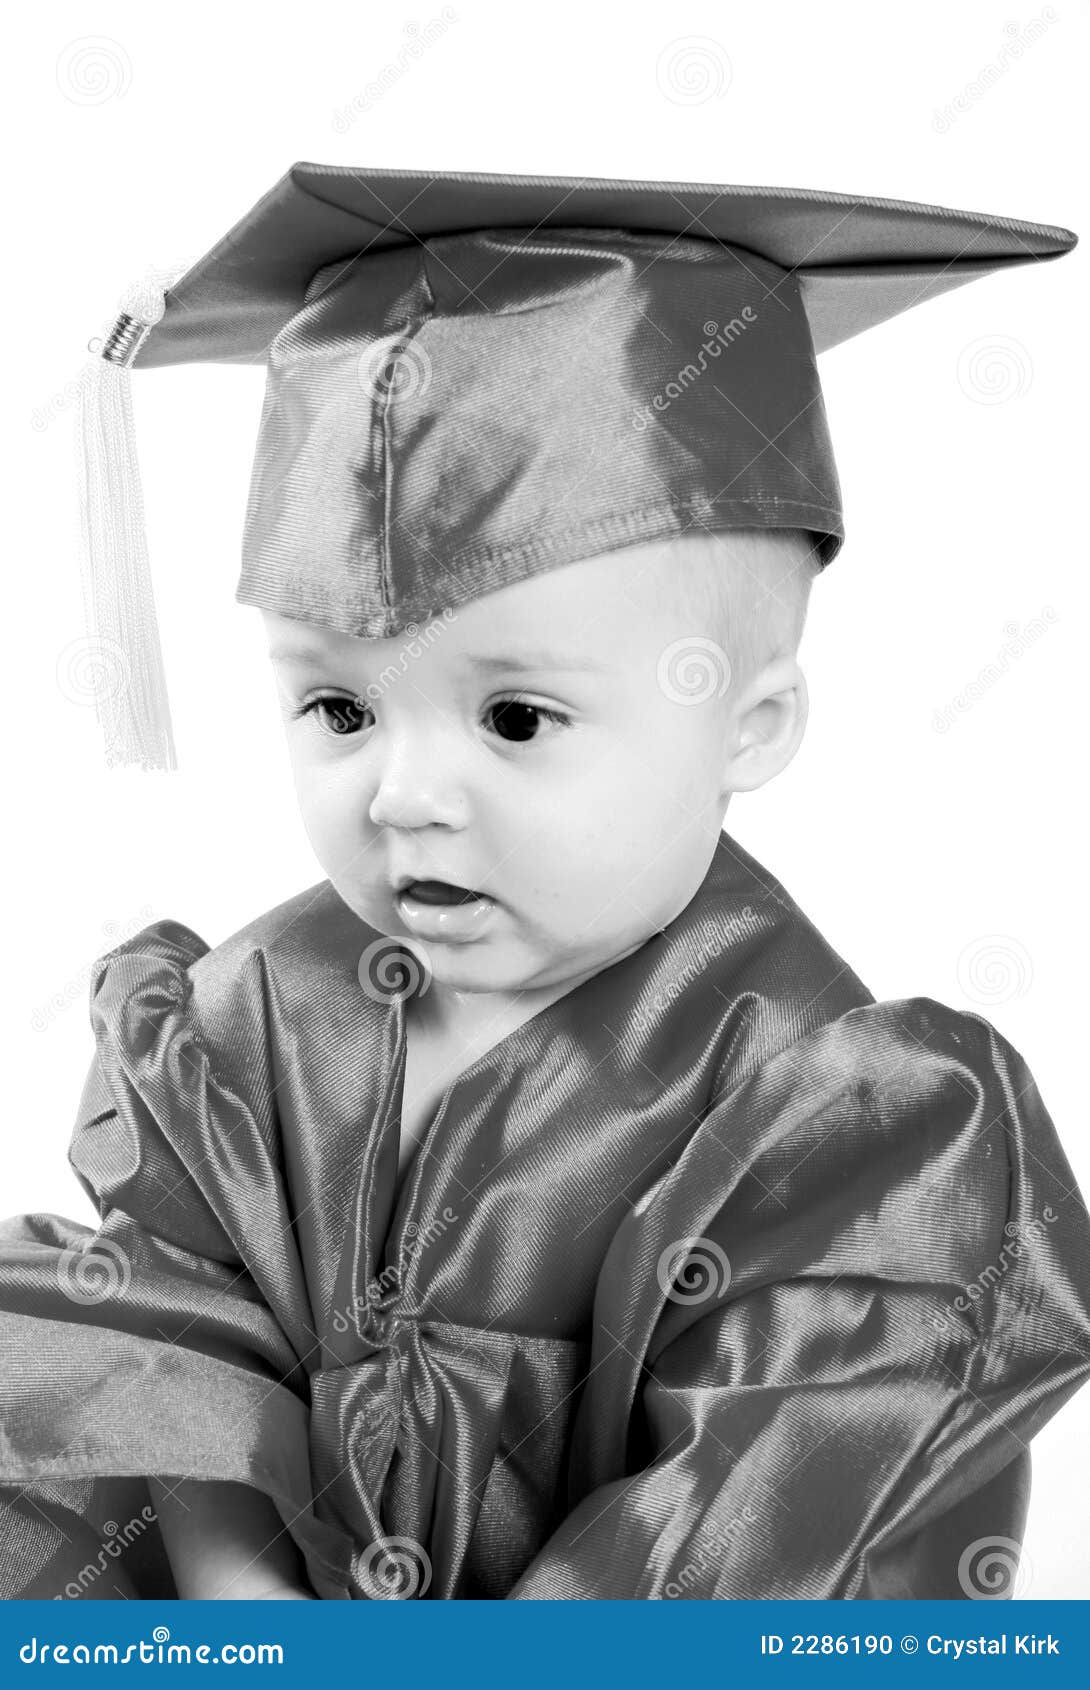 Baby Girl in Graduation Cap and Gown Stock Image - Image of caucasian, baby:  113751597